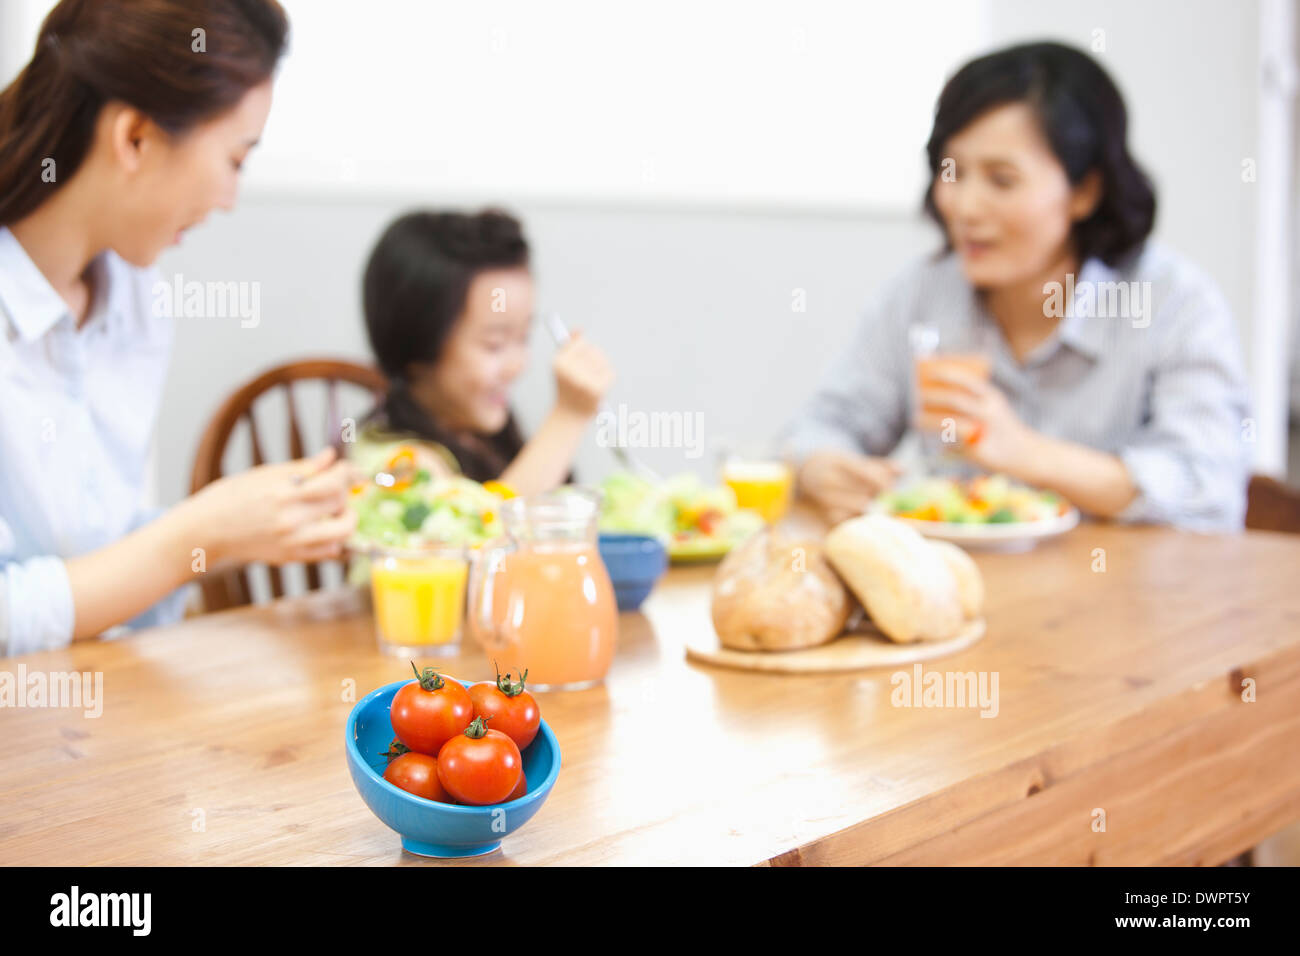 two women and a kid in the kitchen Stock Photo